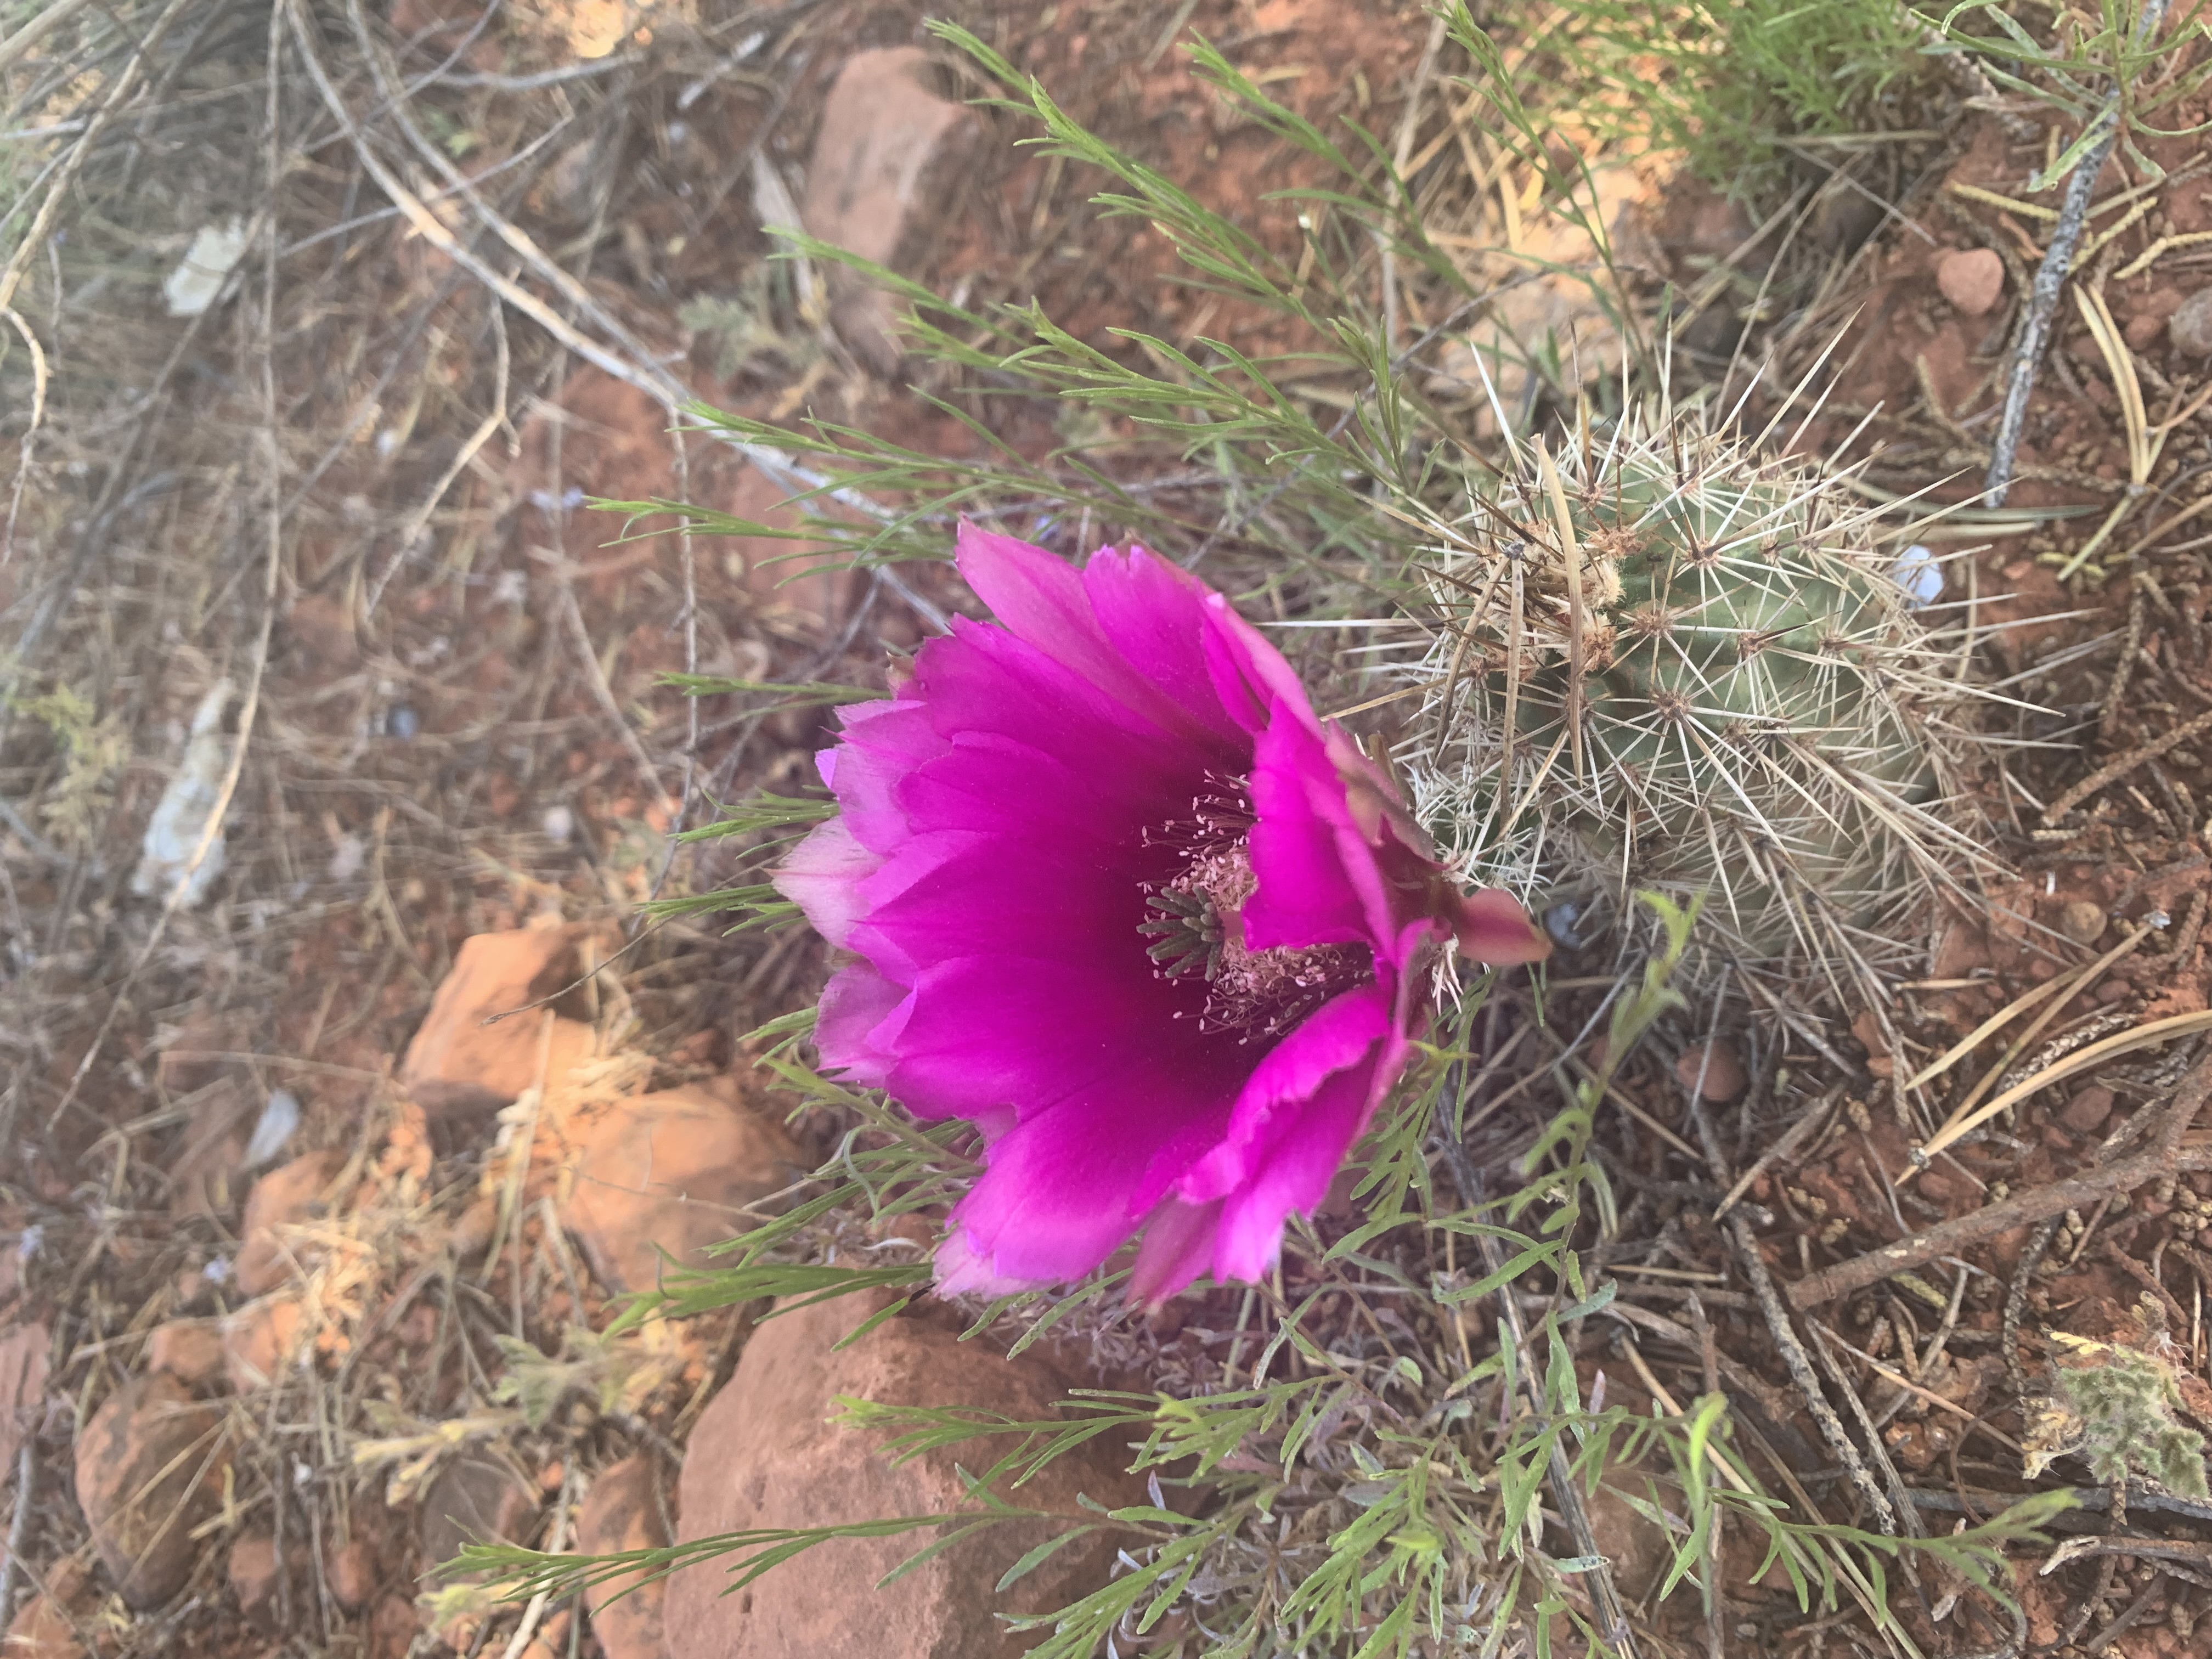 Cactus sprouting a magenta colored flower.